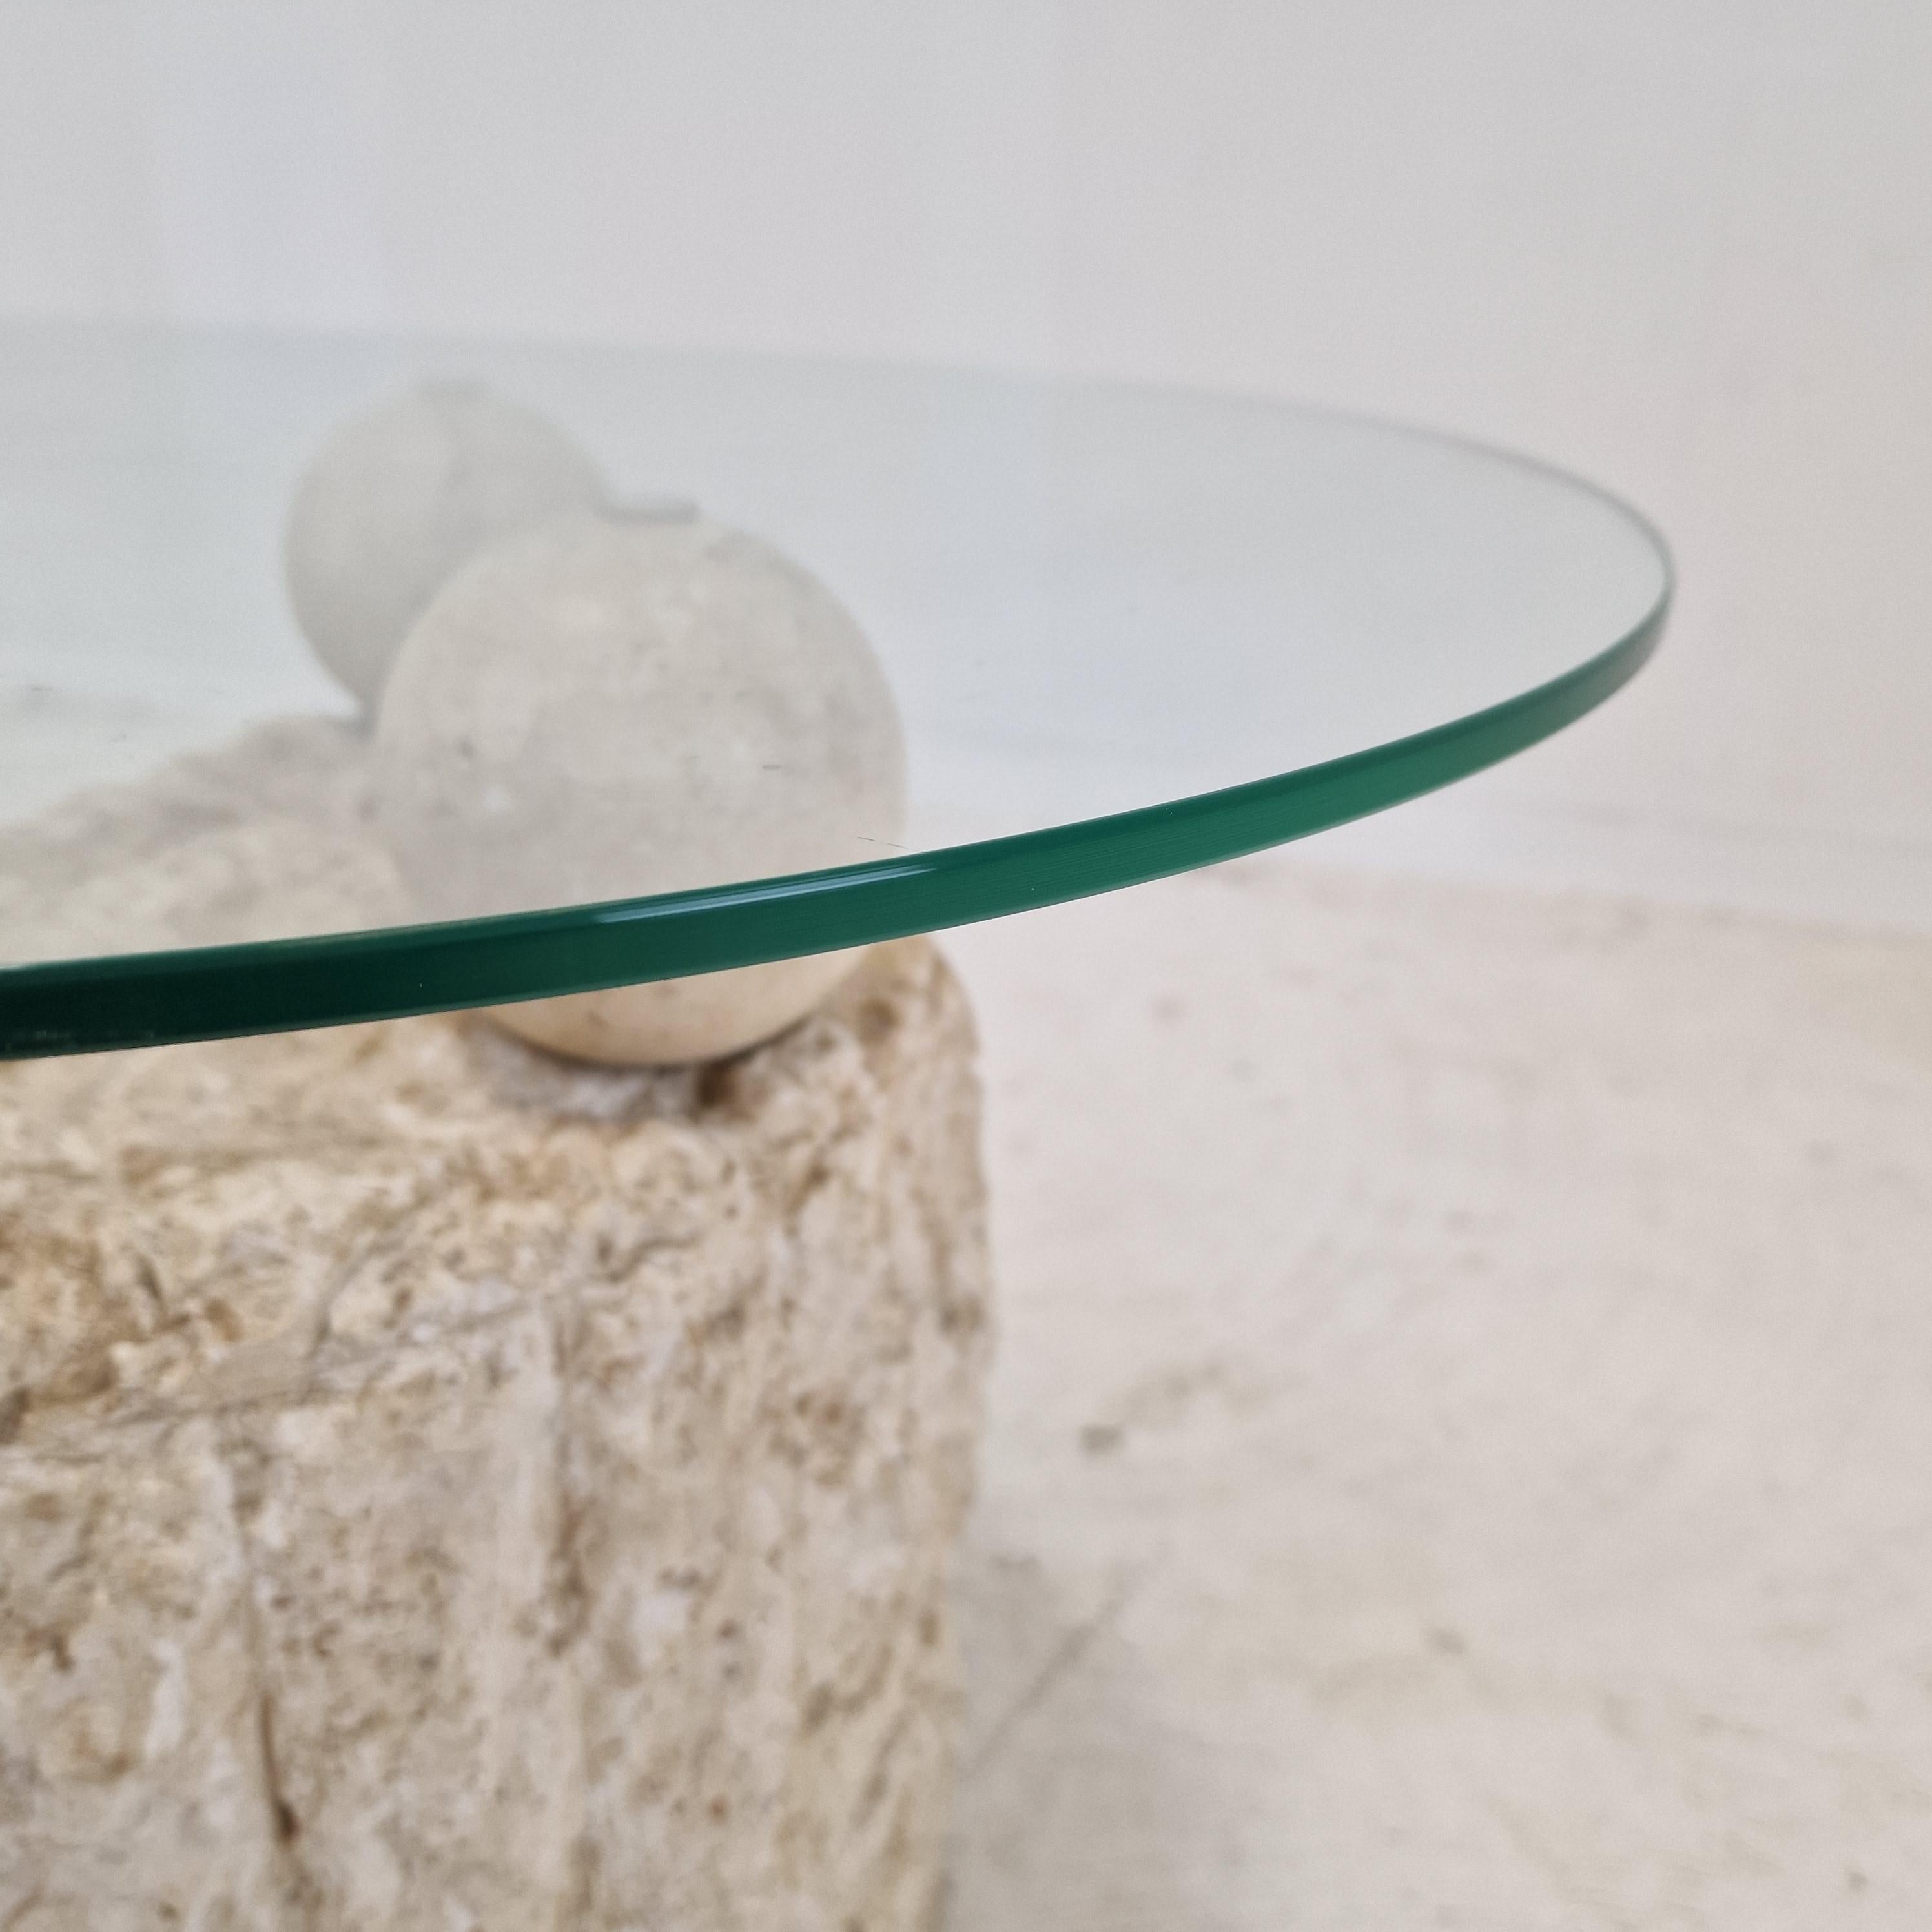 Magnussen Ponte Mactan Stone Coffee or Fossil Stone Table, 1980s For Sale 6